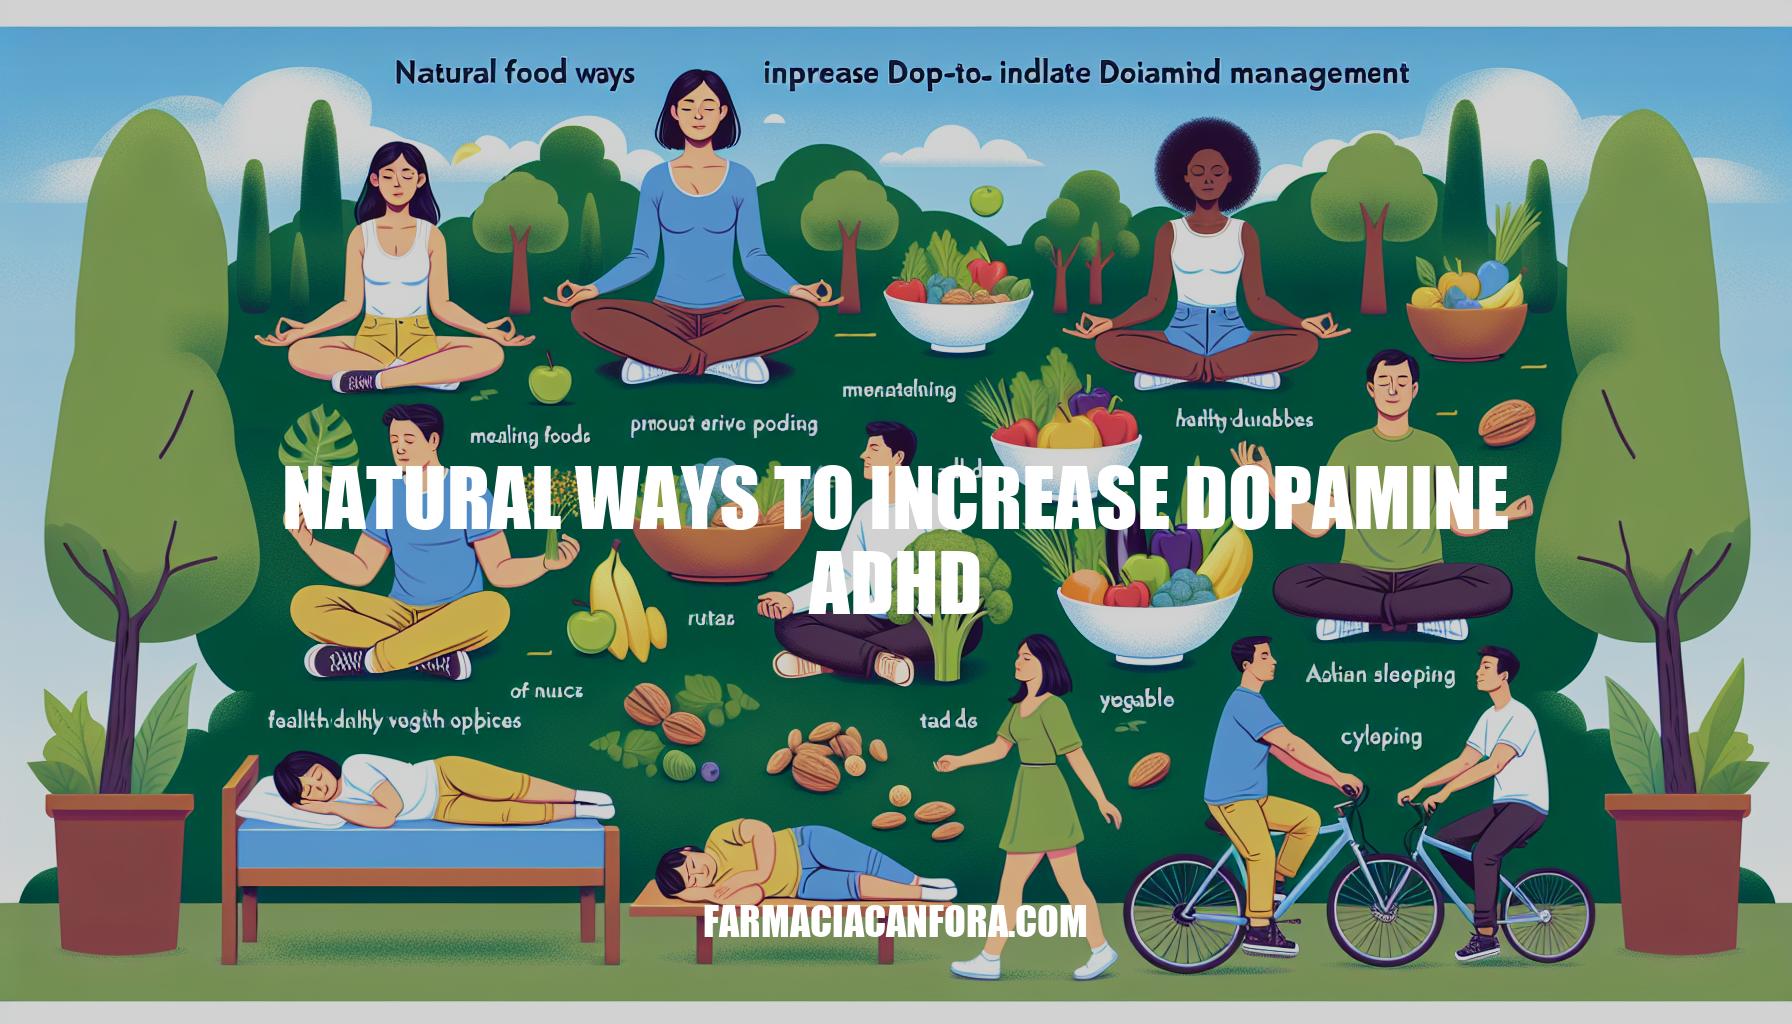 Natural Ways to Increase Dopamine for ADHD Management